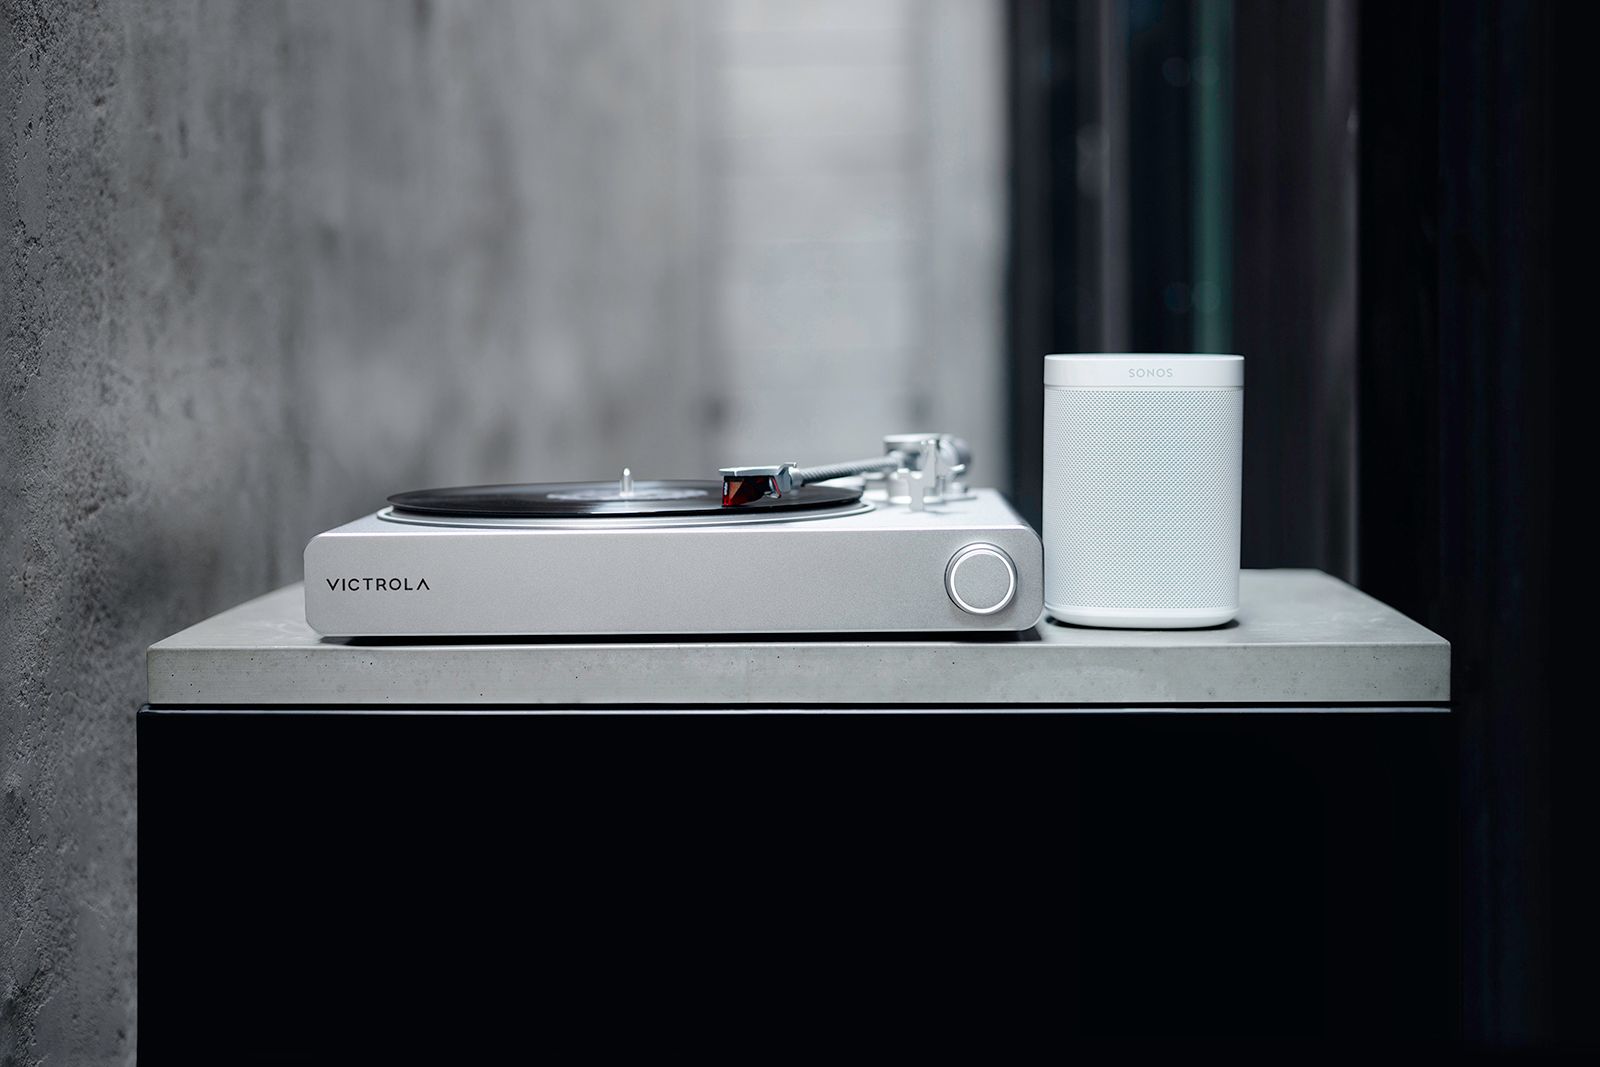 Victrola Stream Carbon turntable with Sonos One speaker